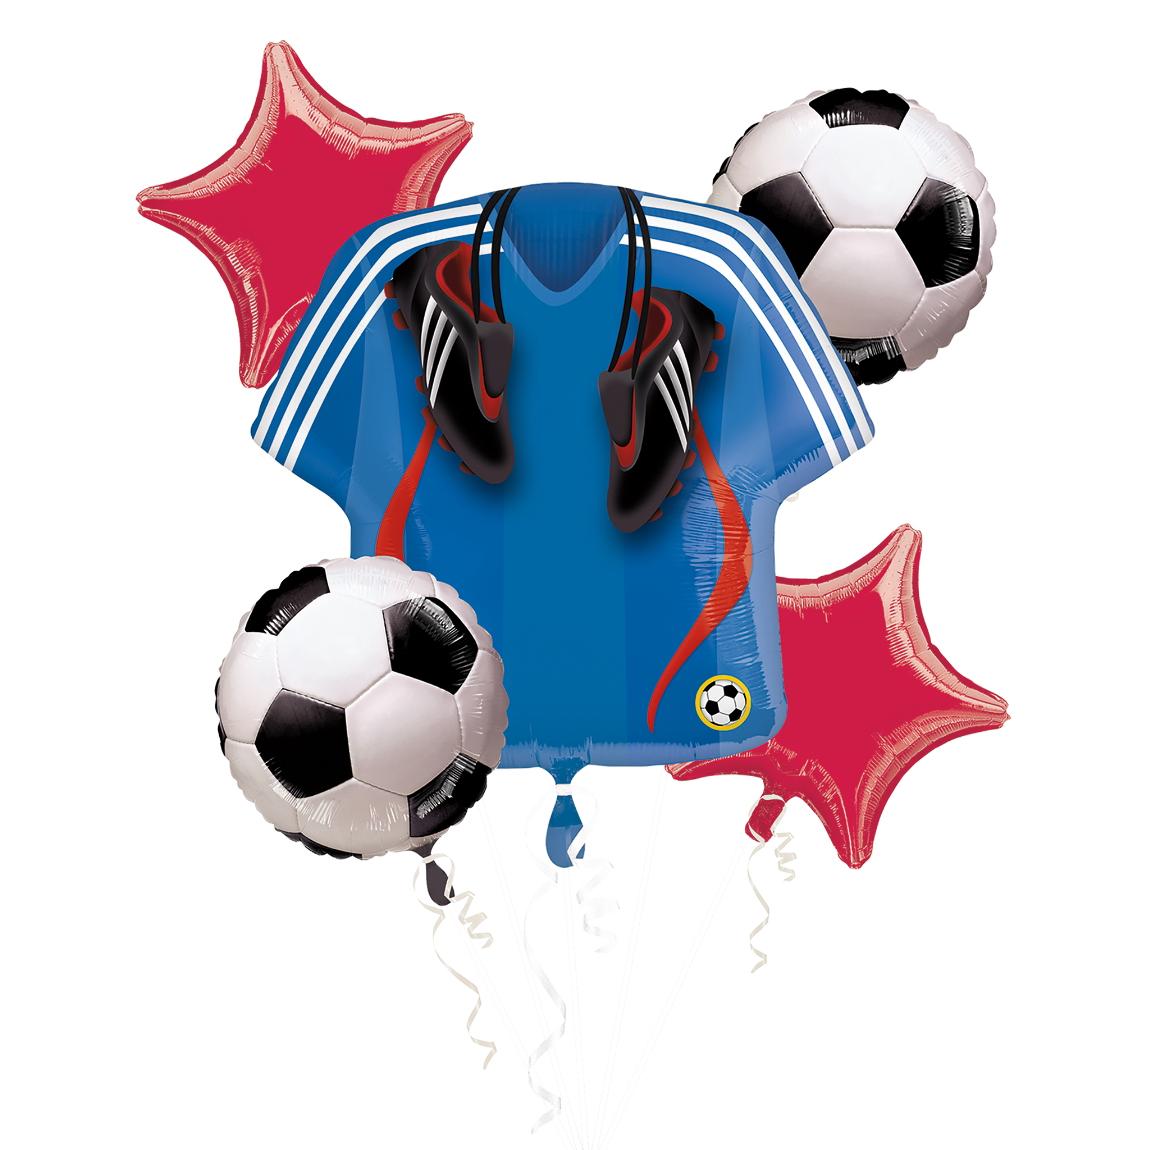 Soccer Balloon Bouquet 5ct Balloons & Streamers - Party Centre